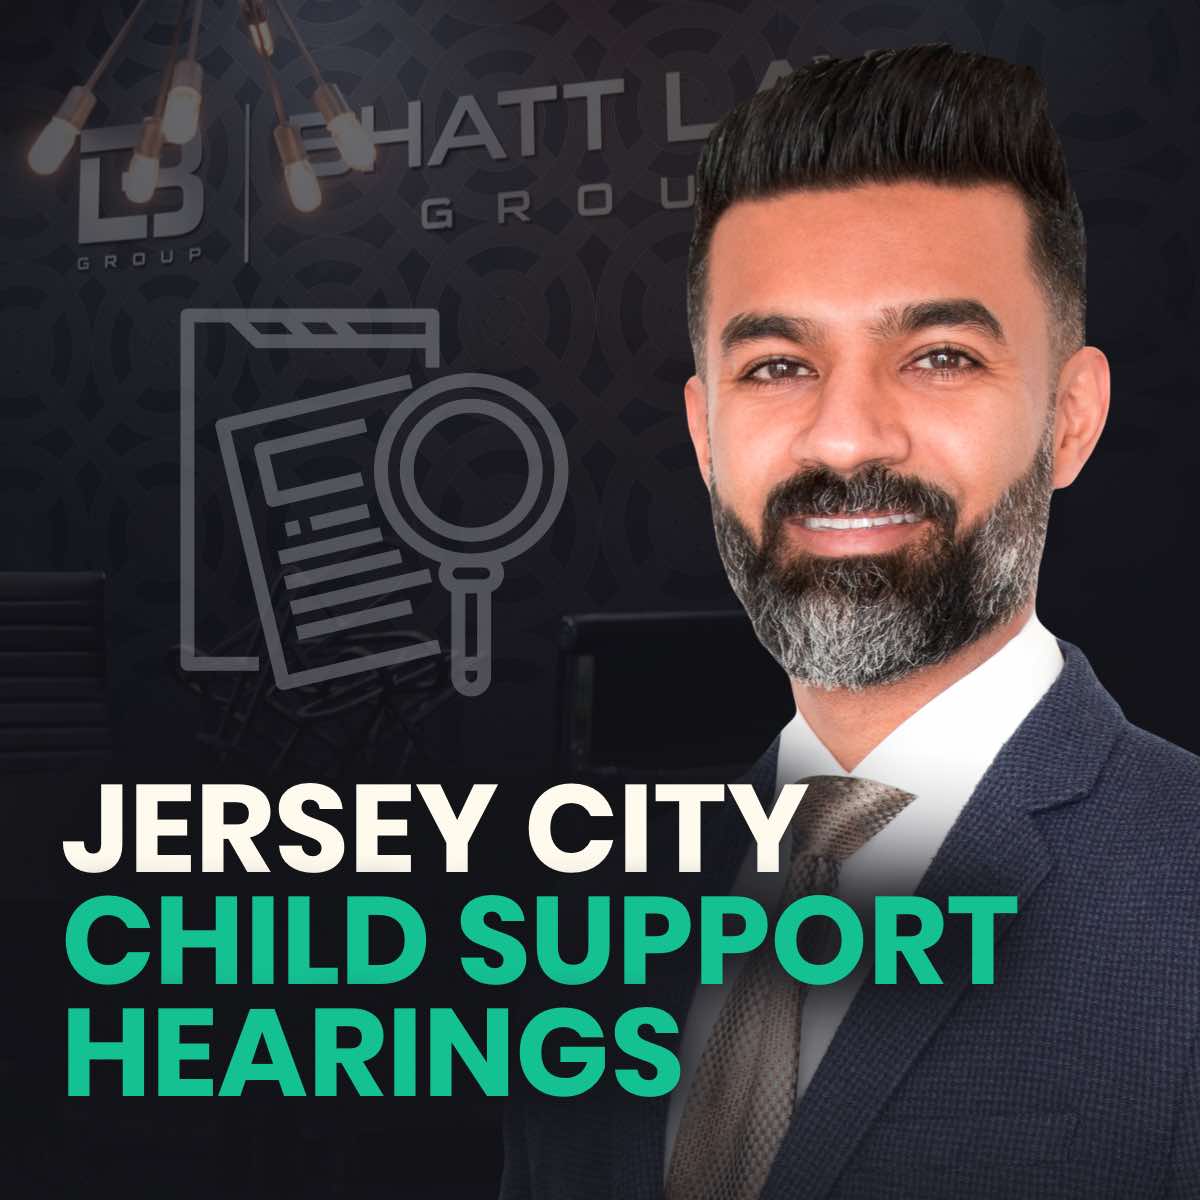 Jersey City Child Support Hearings